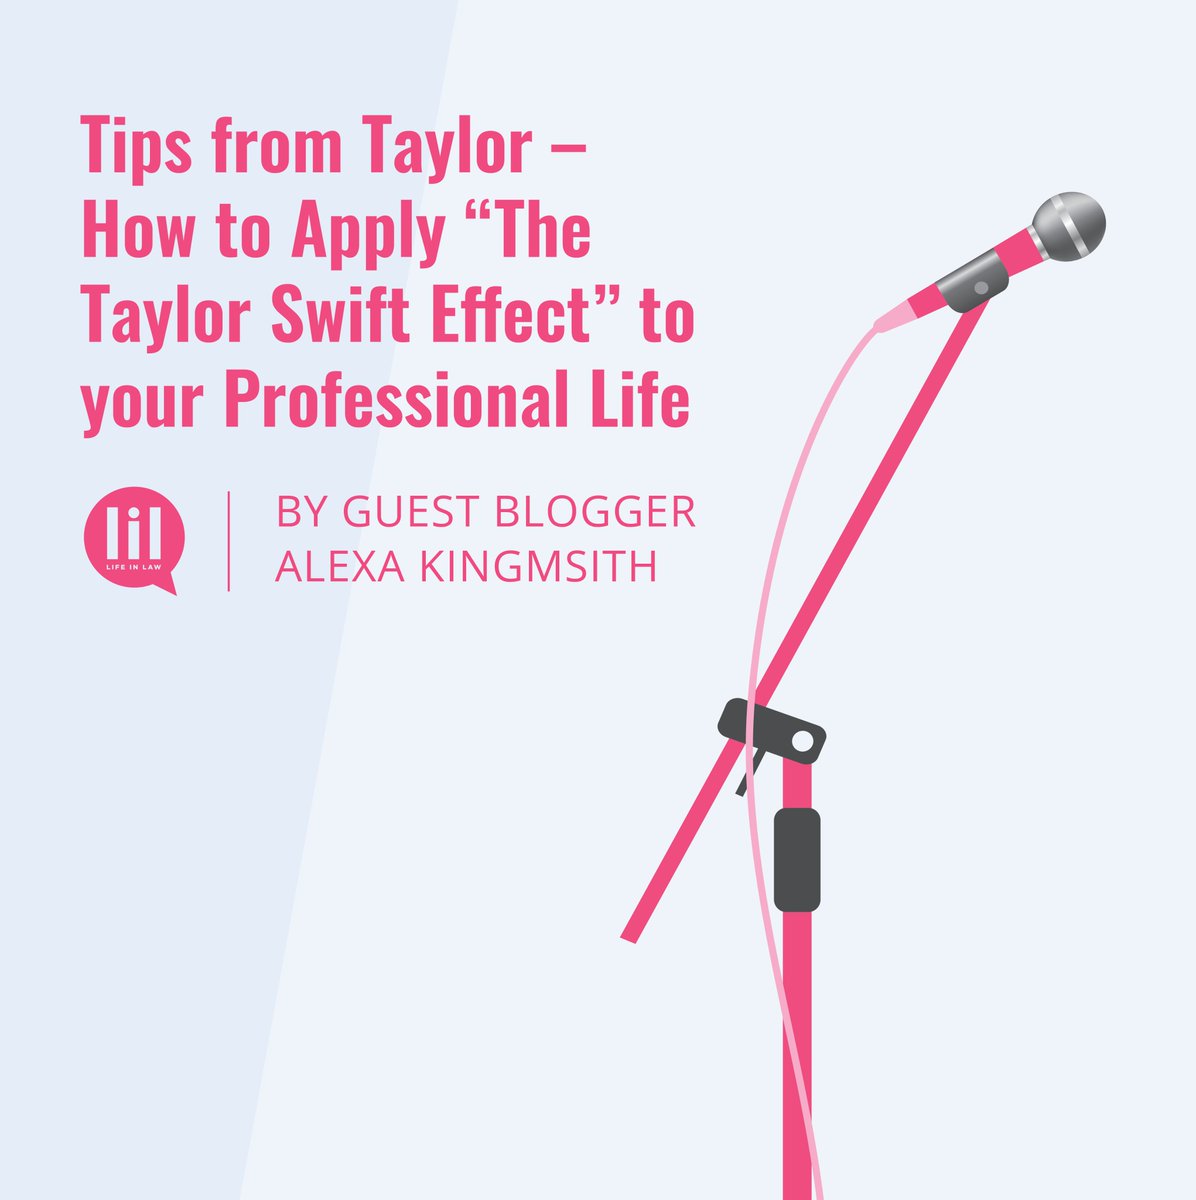 In her latest blog post, @HarperGreyLLP’s Director of Marketing and LiL Guest Blogger, Alexa Kingsmith discusses the application of the “Taylor Swift Effect”, highlighting themes of authenticity, redefined femininity, and activism. Give it a read here lifeinlaw.ca/blog/tips-from…